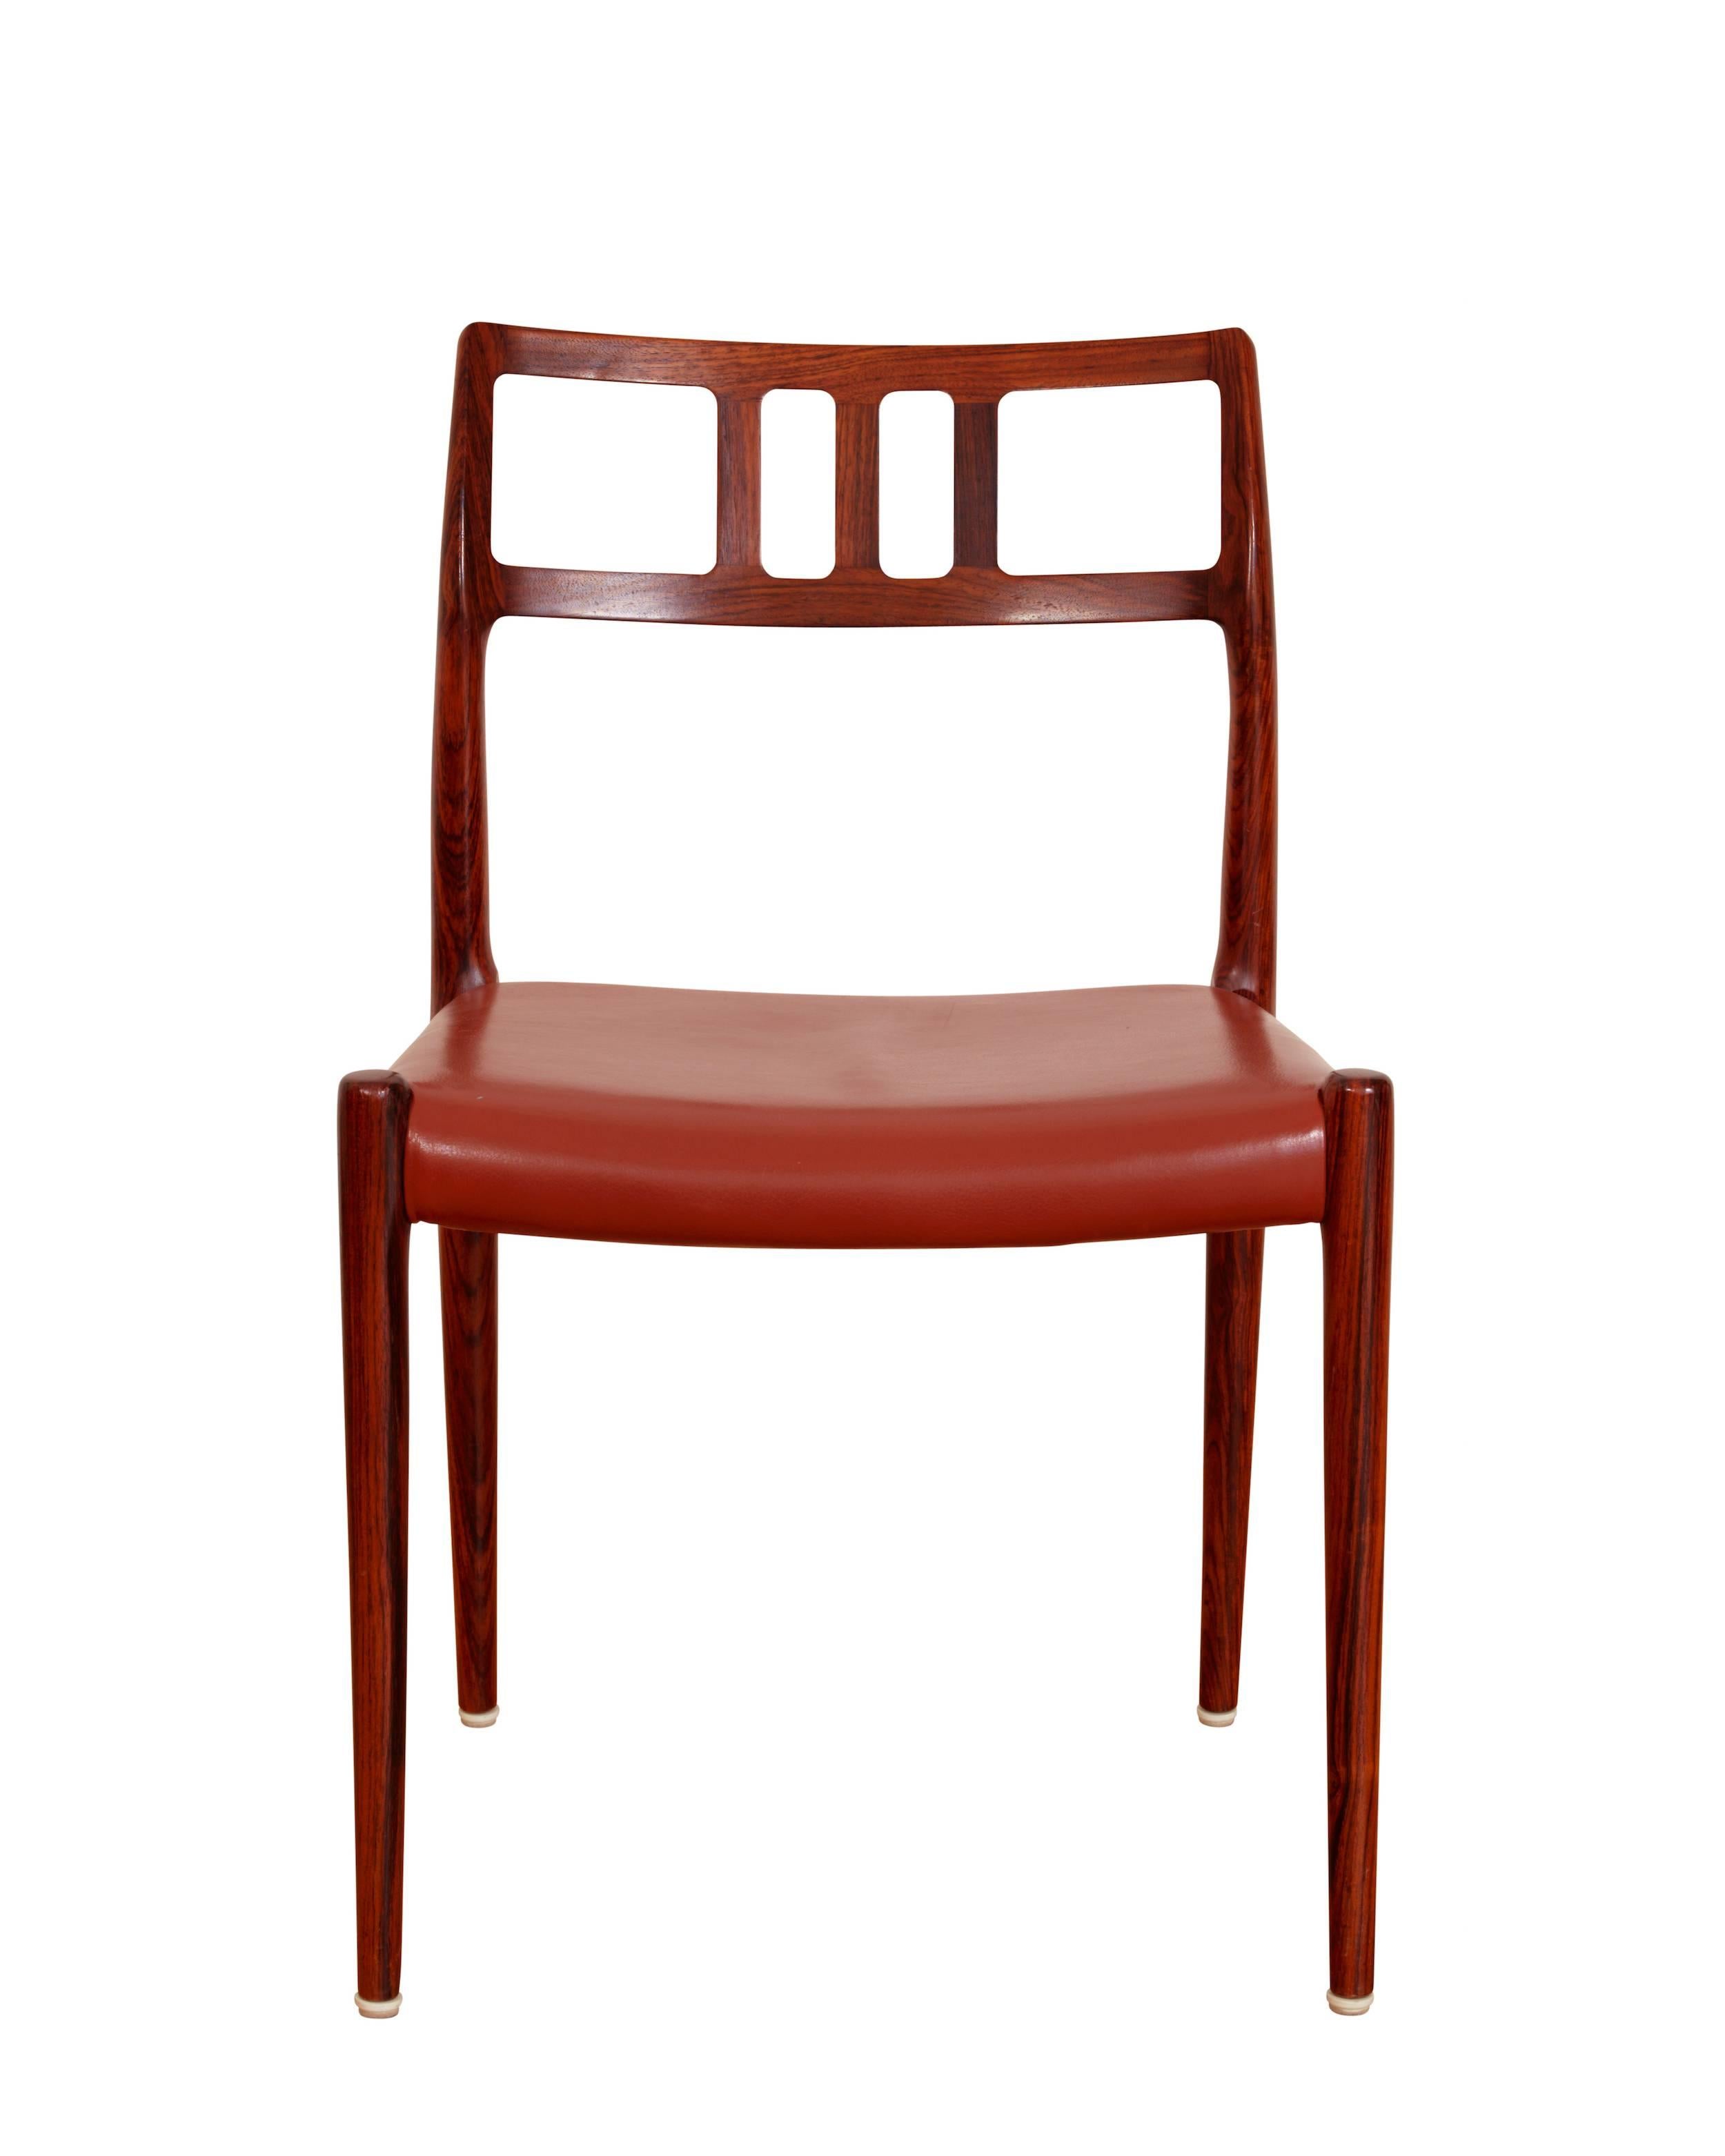 A set of six dining room chairs of rosewood, upholstered with red leather.
Manufactured by J. L. Møller.